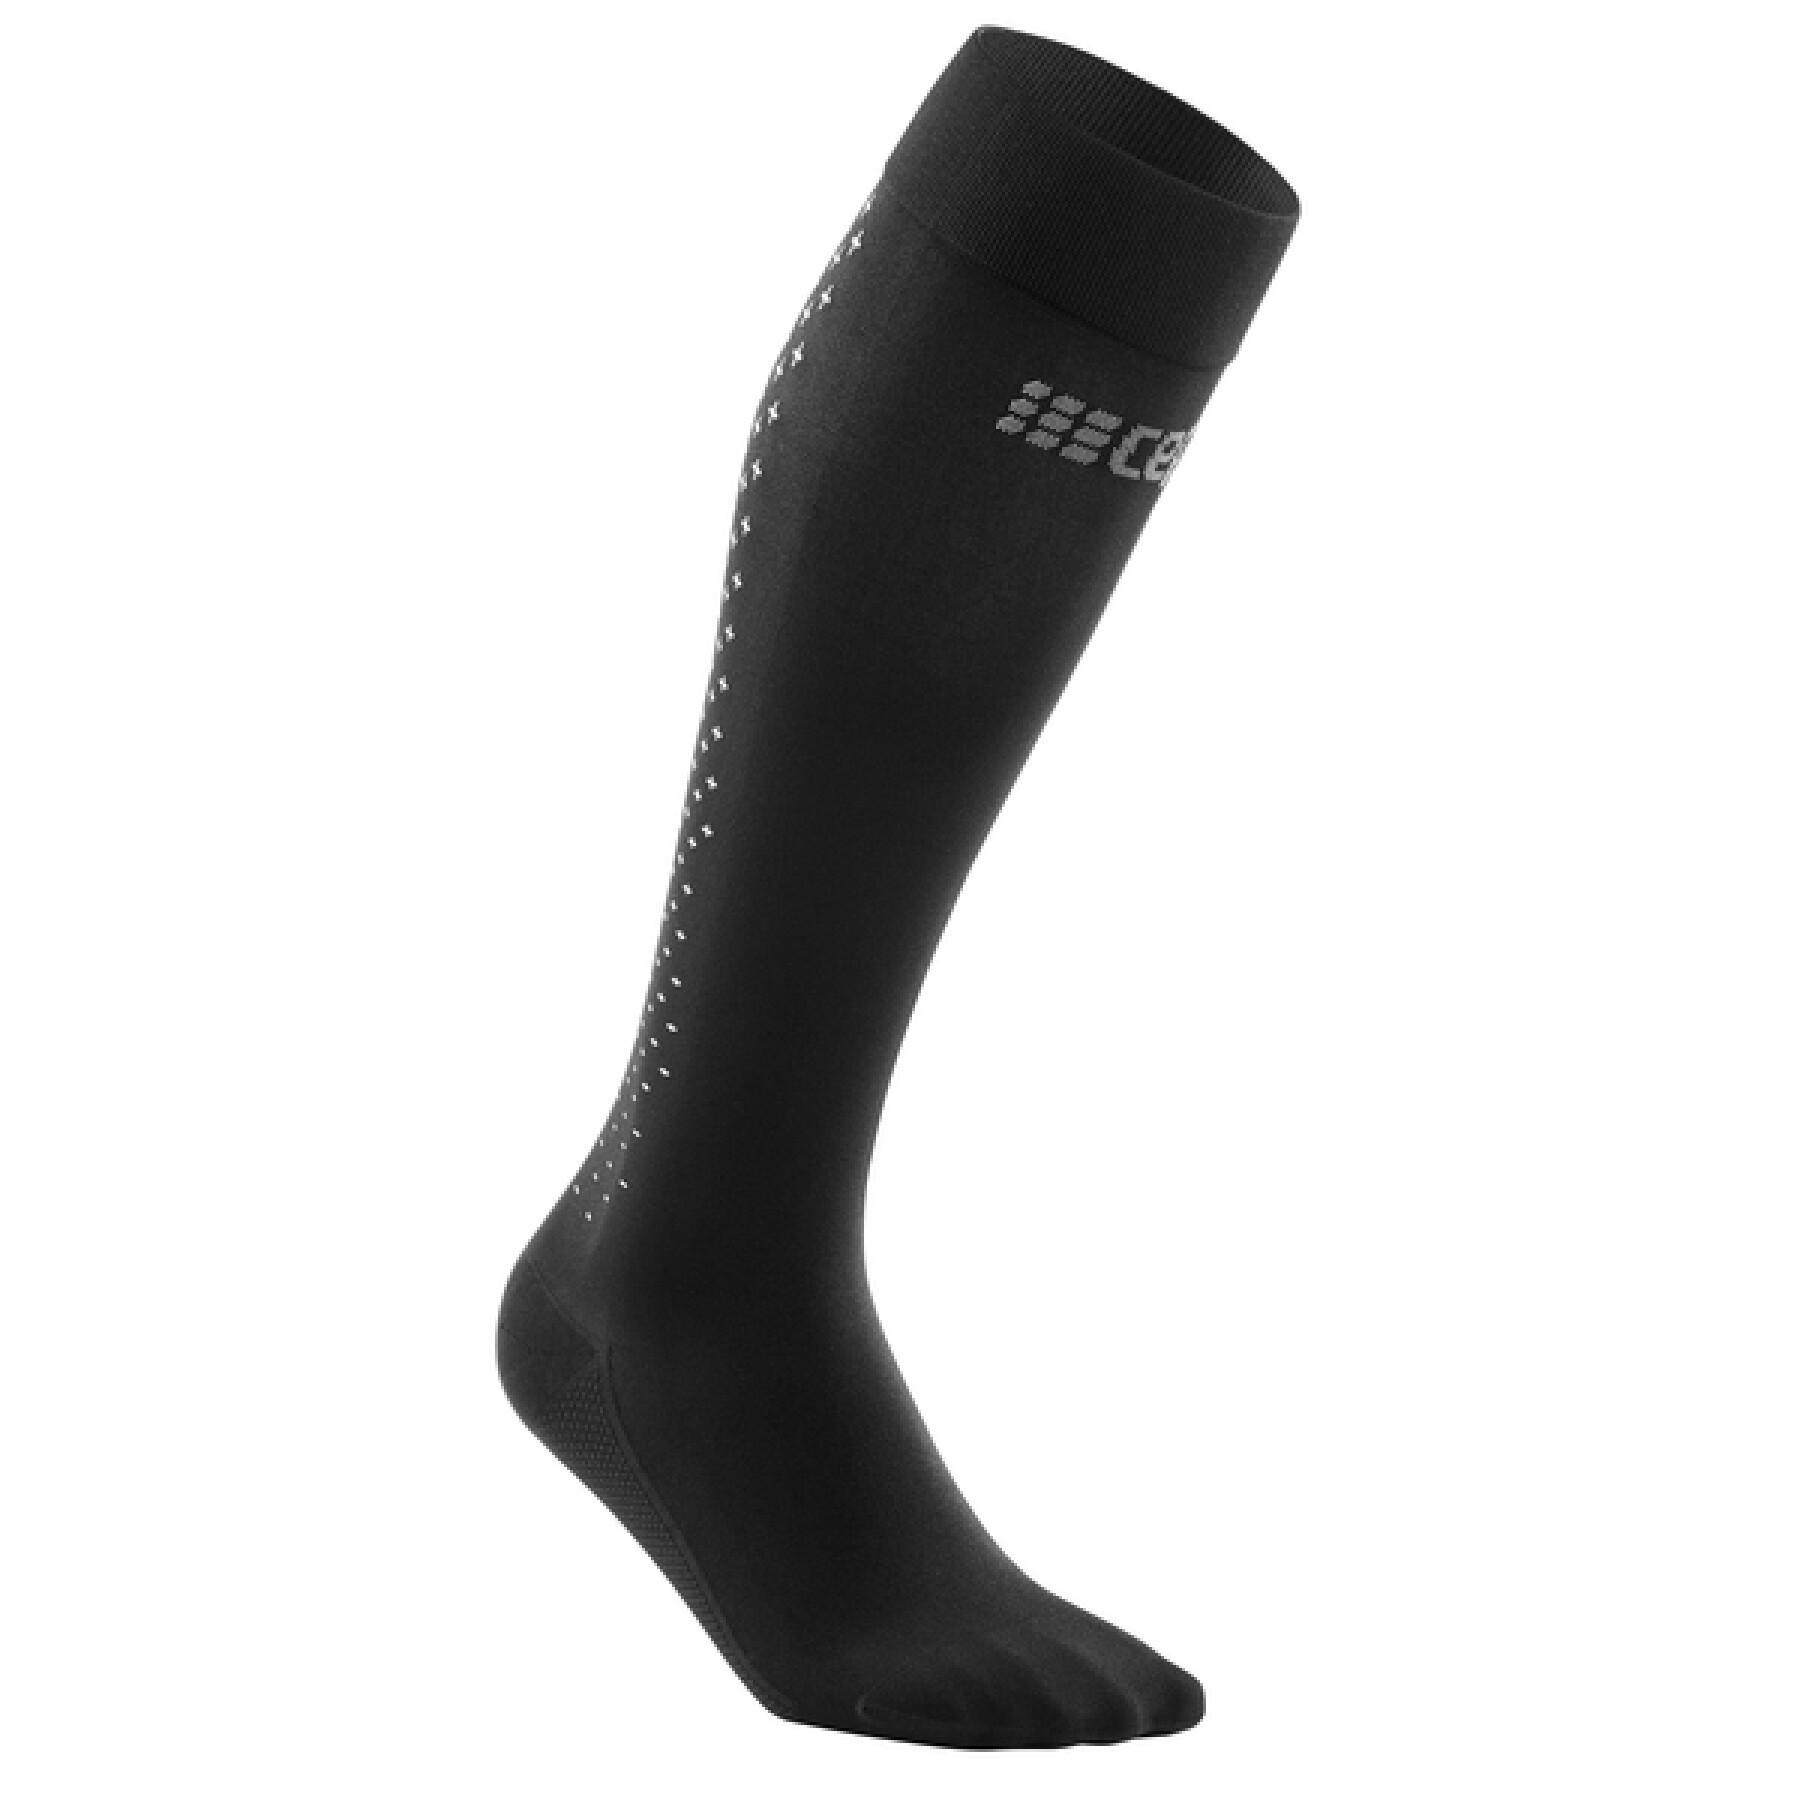 Recovery socks for women CEP Compression - Recycled socks - Accessories -  Teamwear